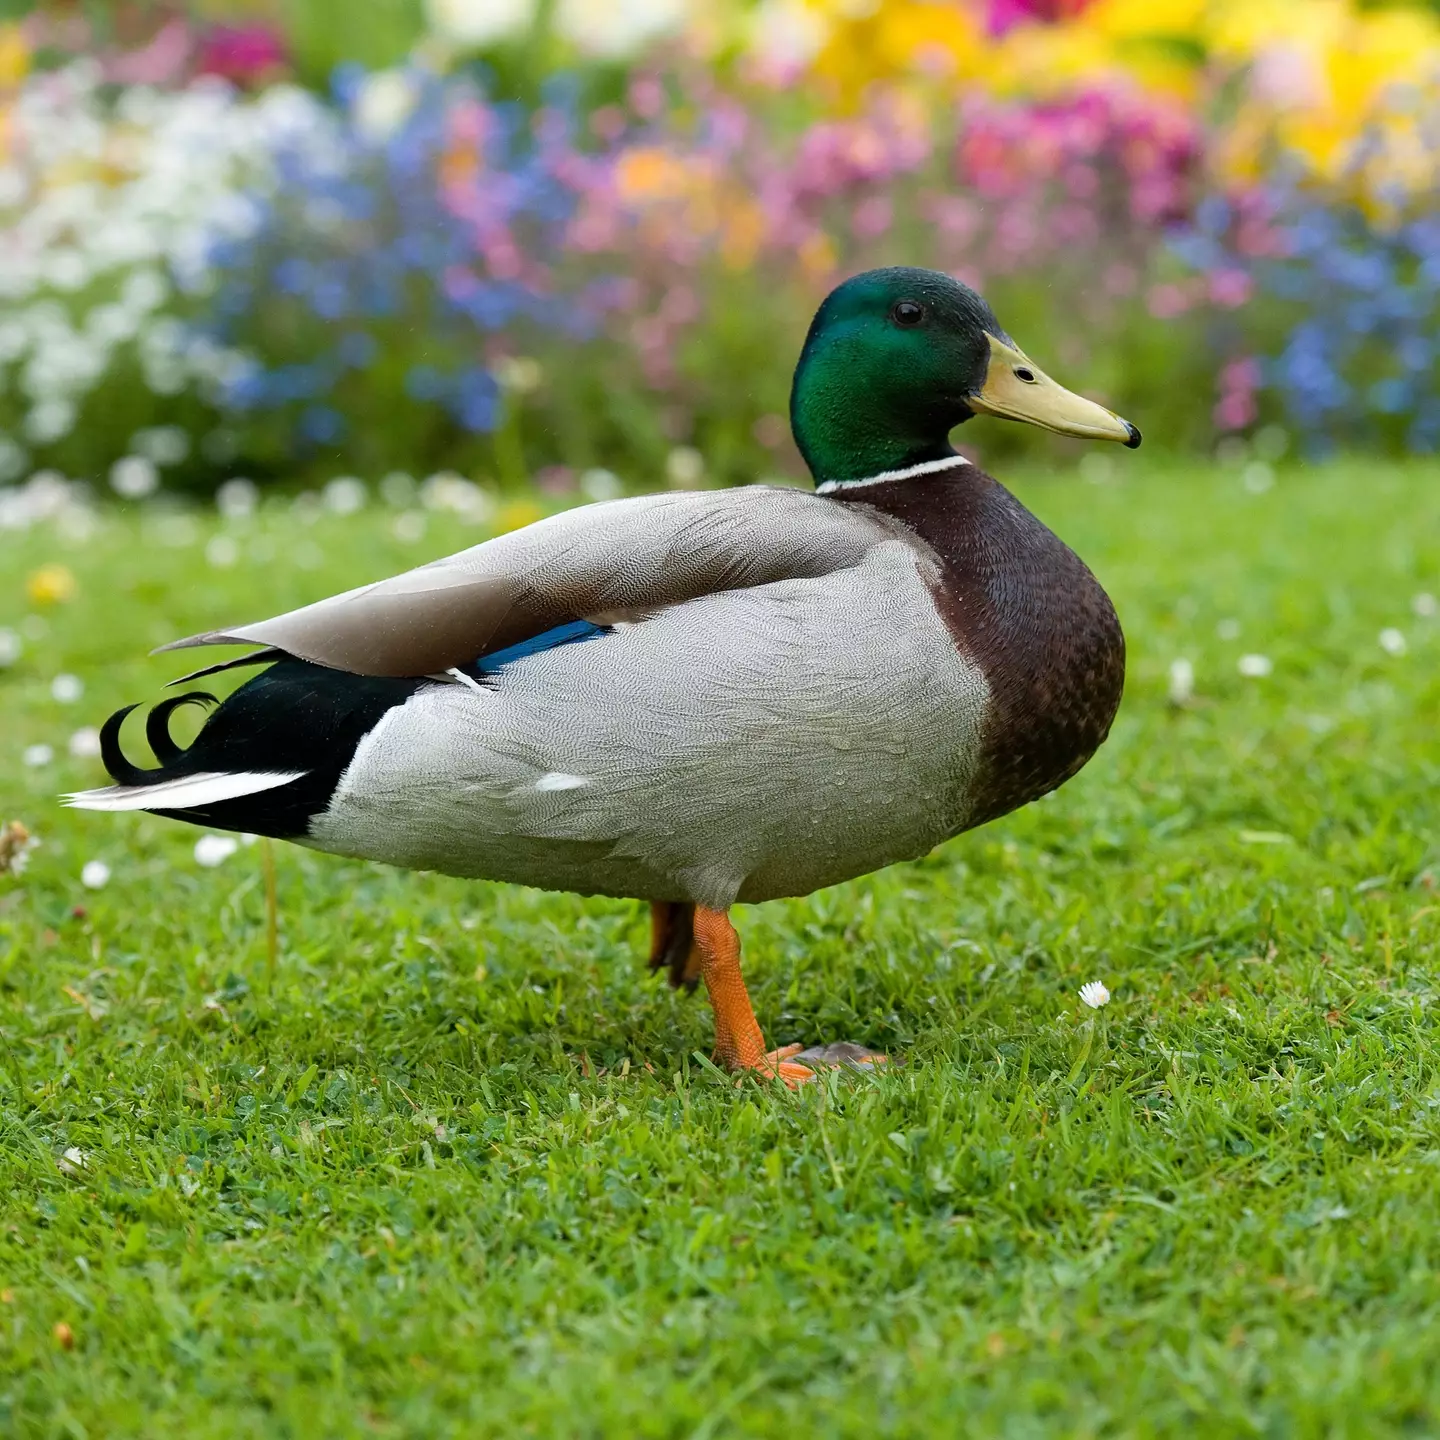 A pet duck has led North Carolina police to the dead body of a 92-year-old grandmother.